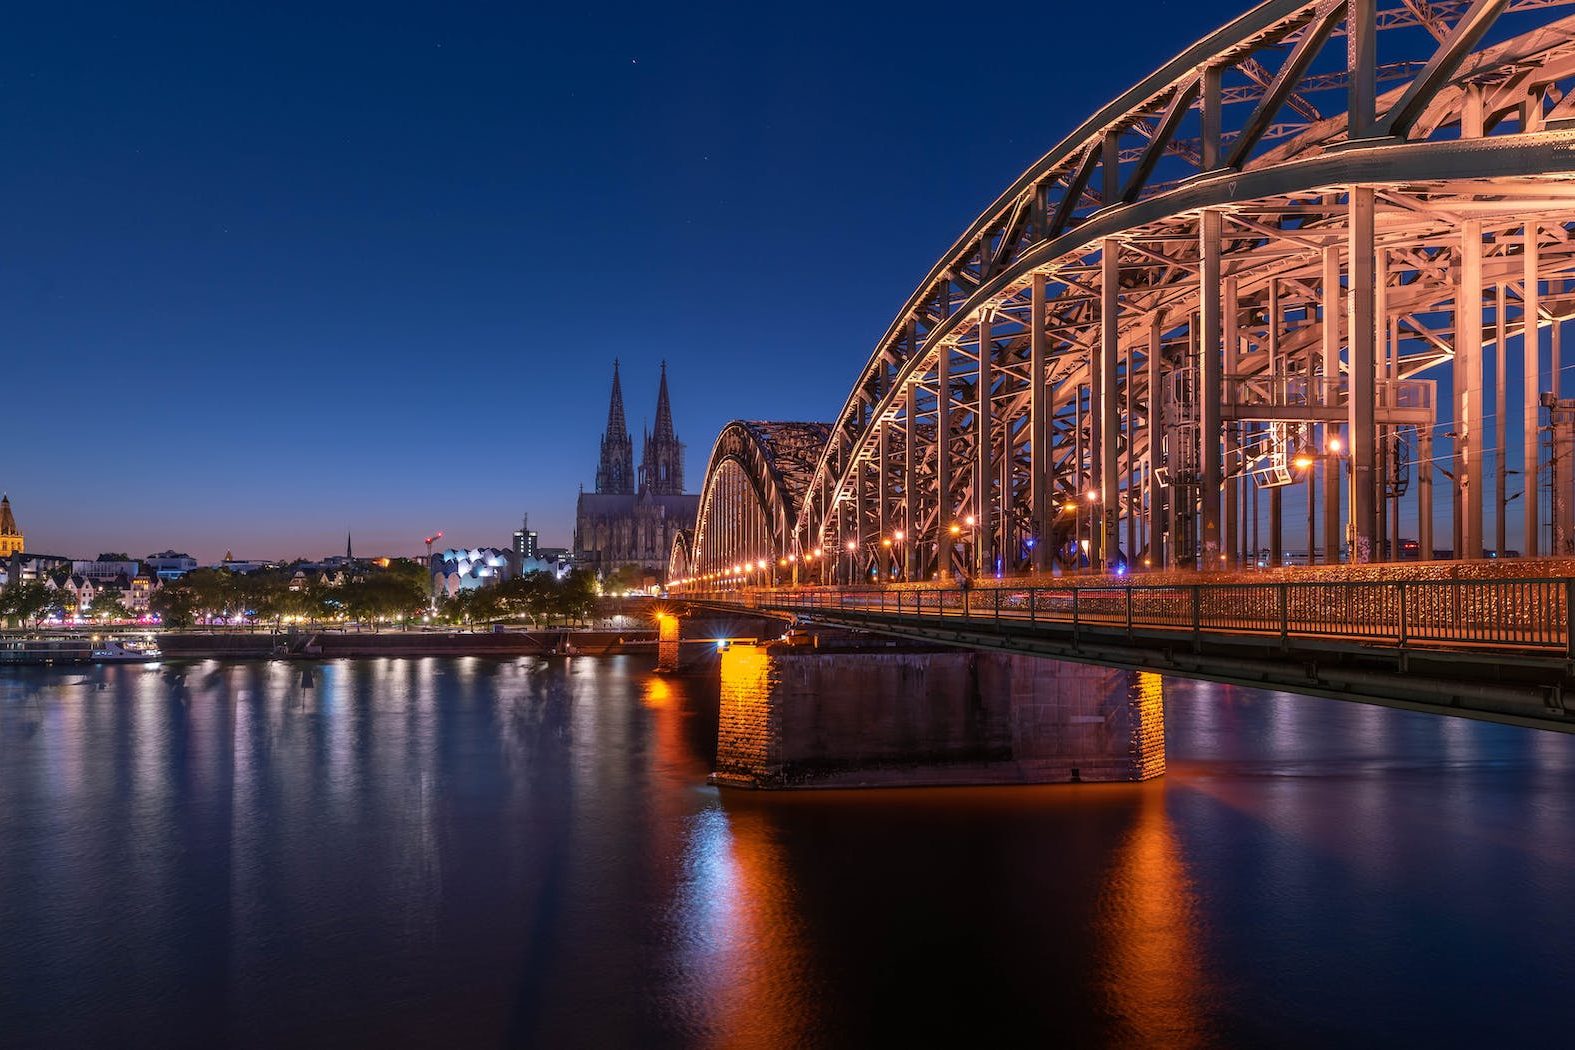 the cologne cathedral and bridge at night